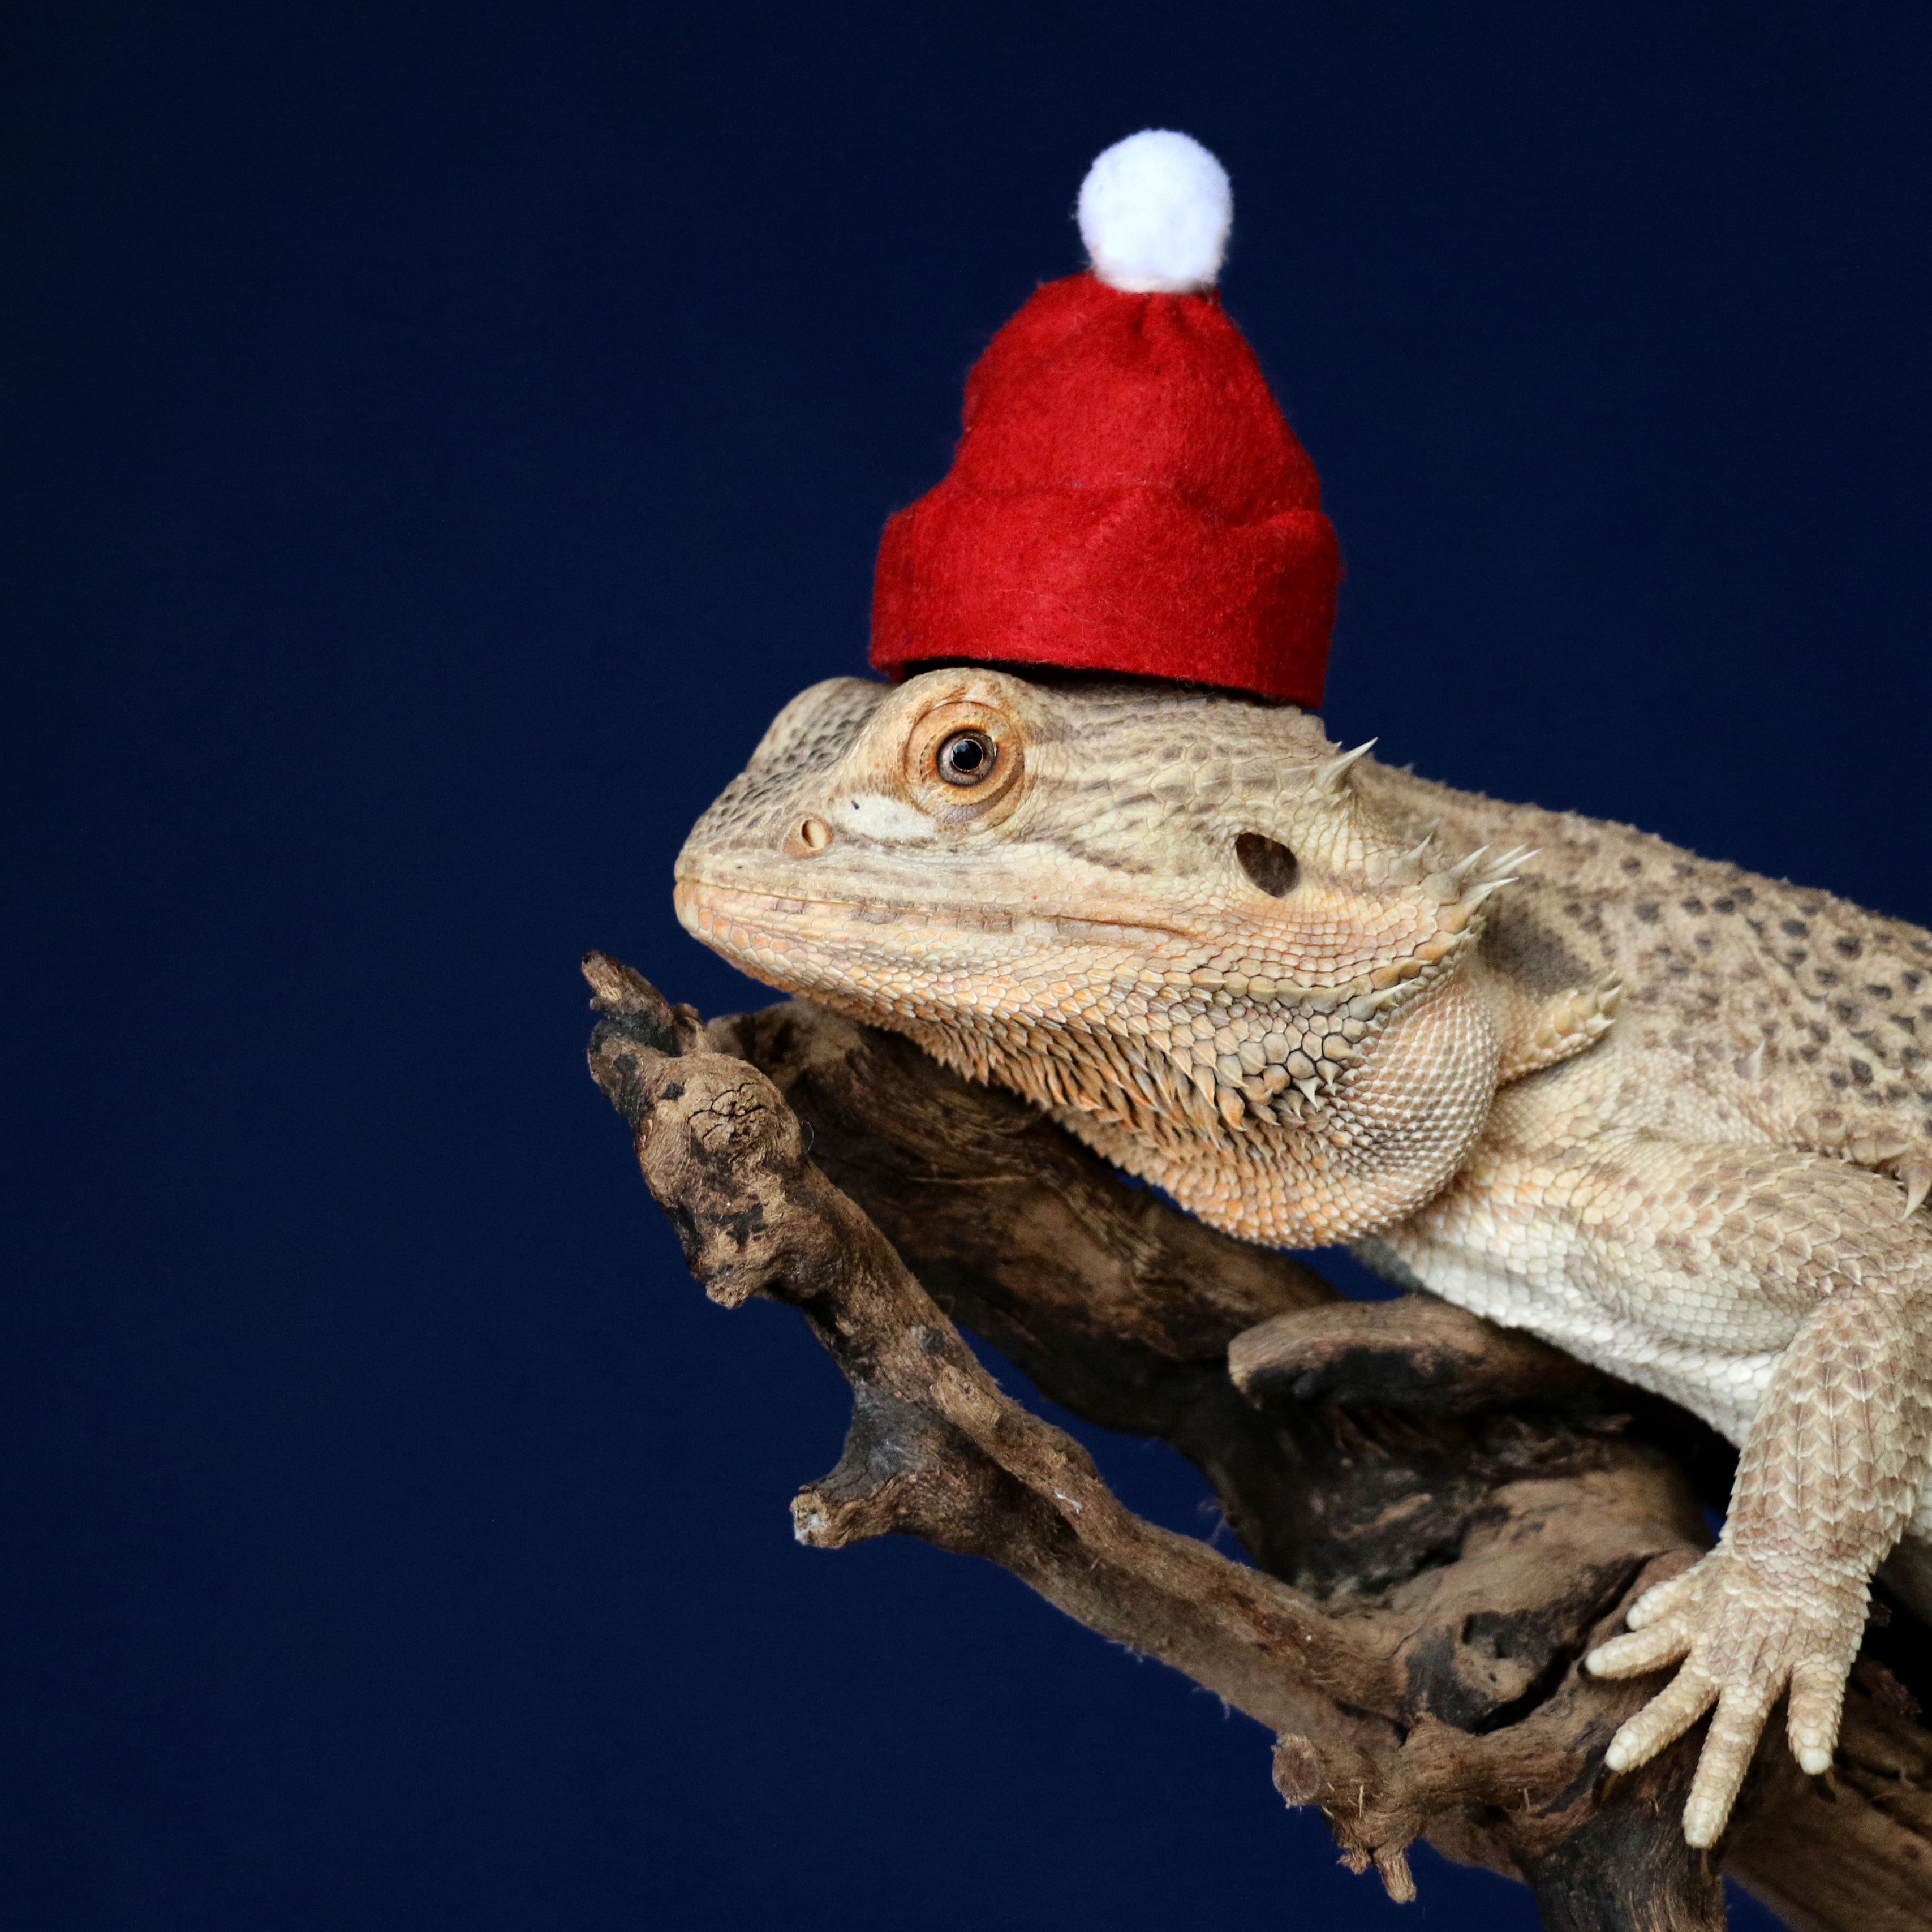 Download wallpaper 3415x3415 chameleon, lizard, hat, funny, reptile, new year, christmas ipad pro 12.9 retina for parallax HD background